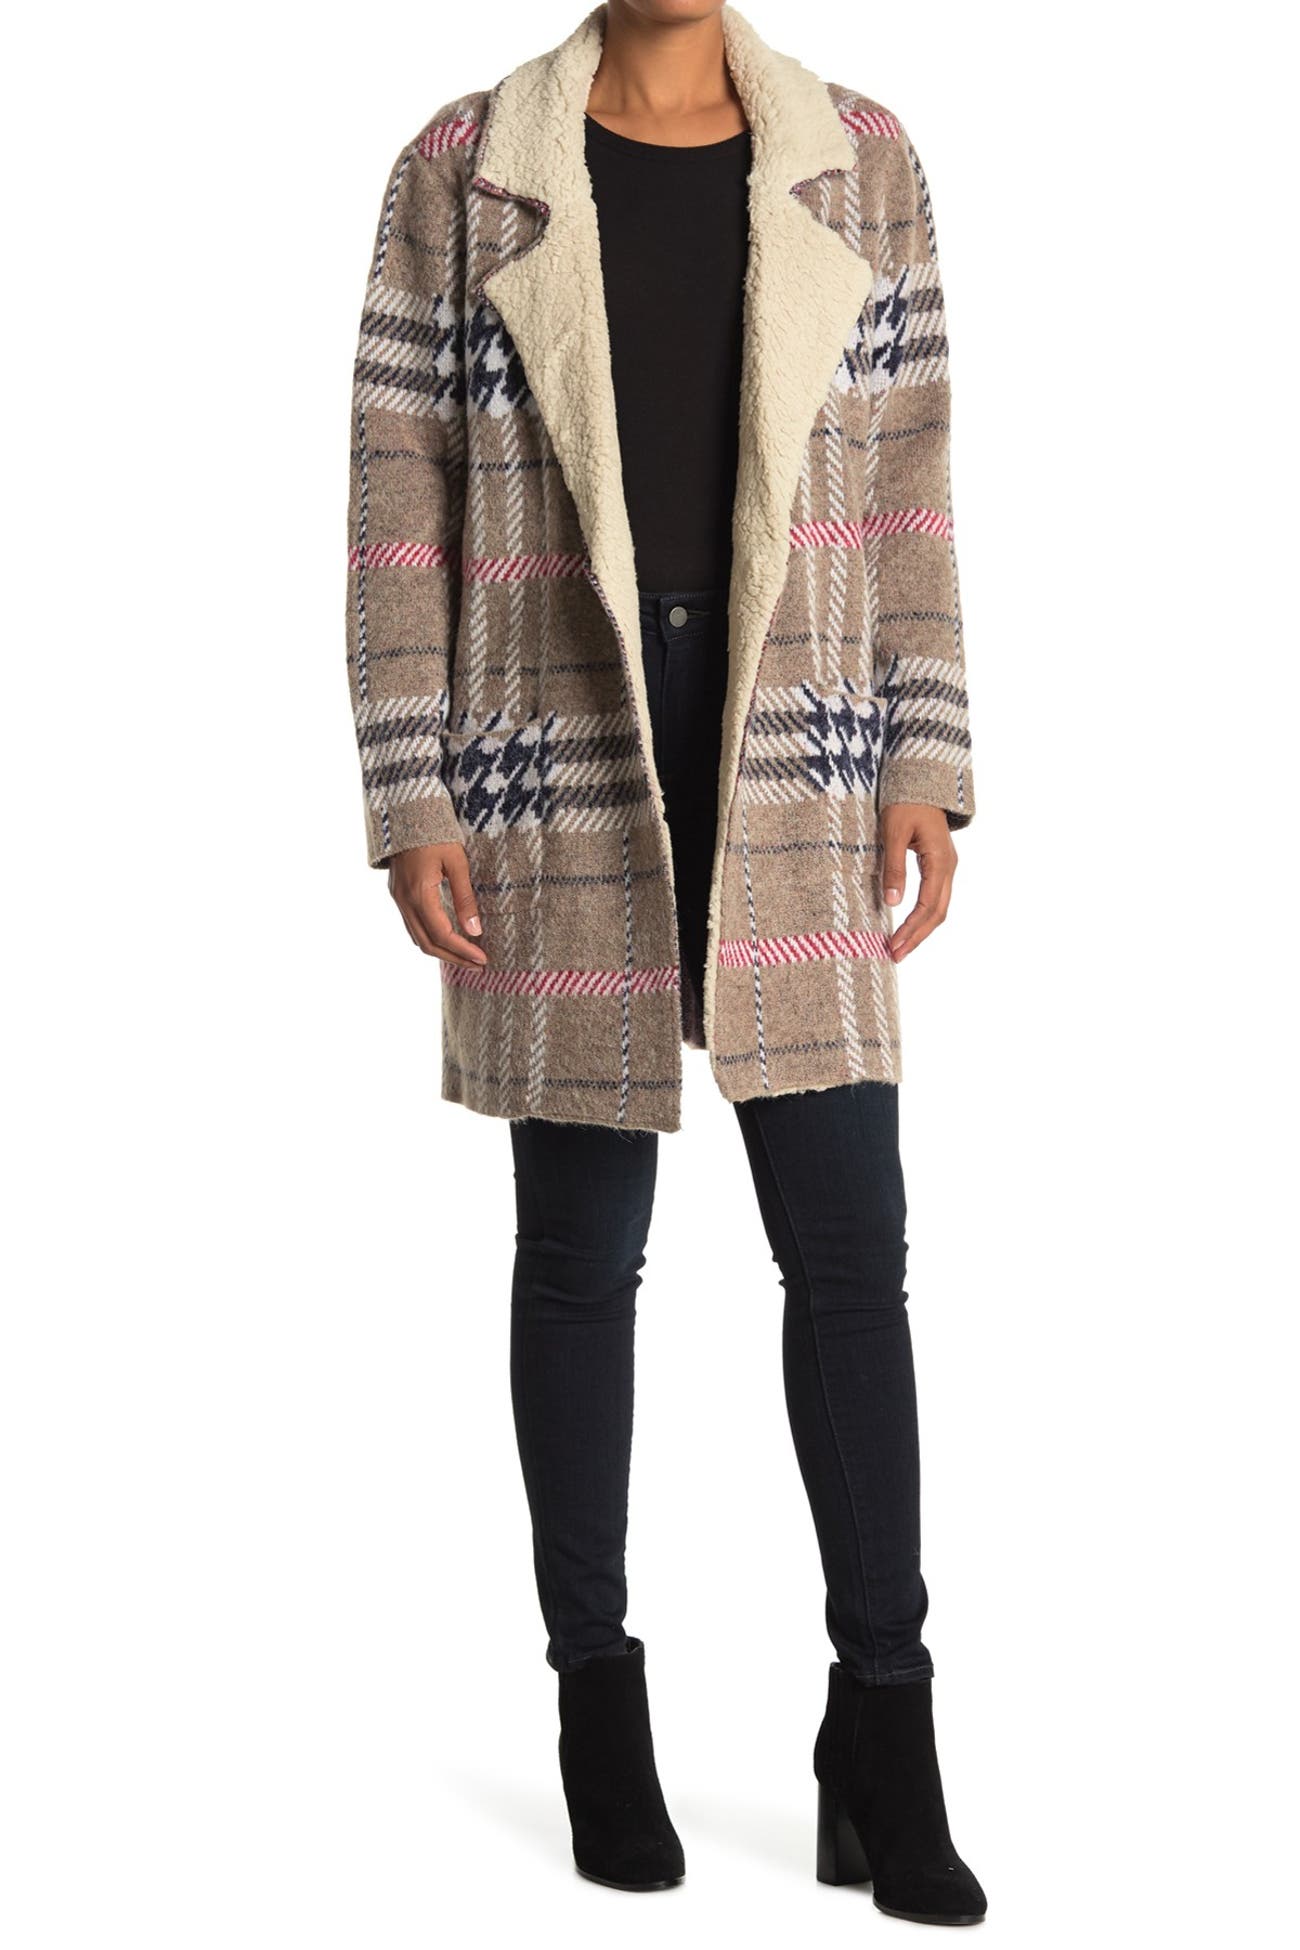 Cyrus | Plaid Print Faux Shearling Lined Coat | Nordstrom Rack